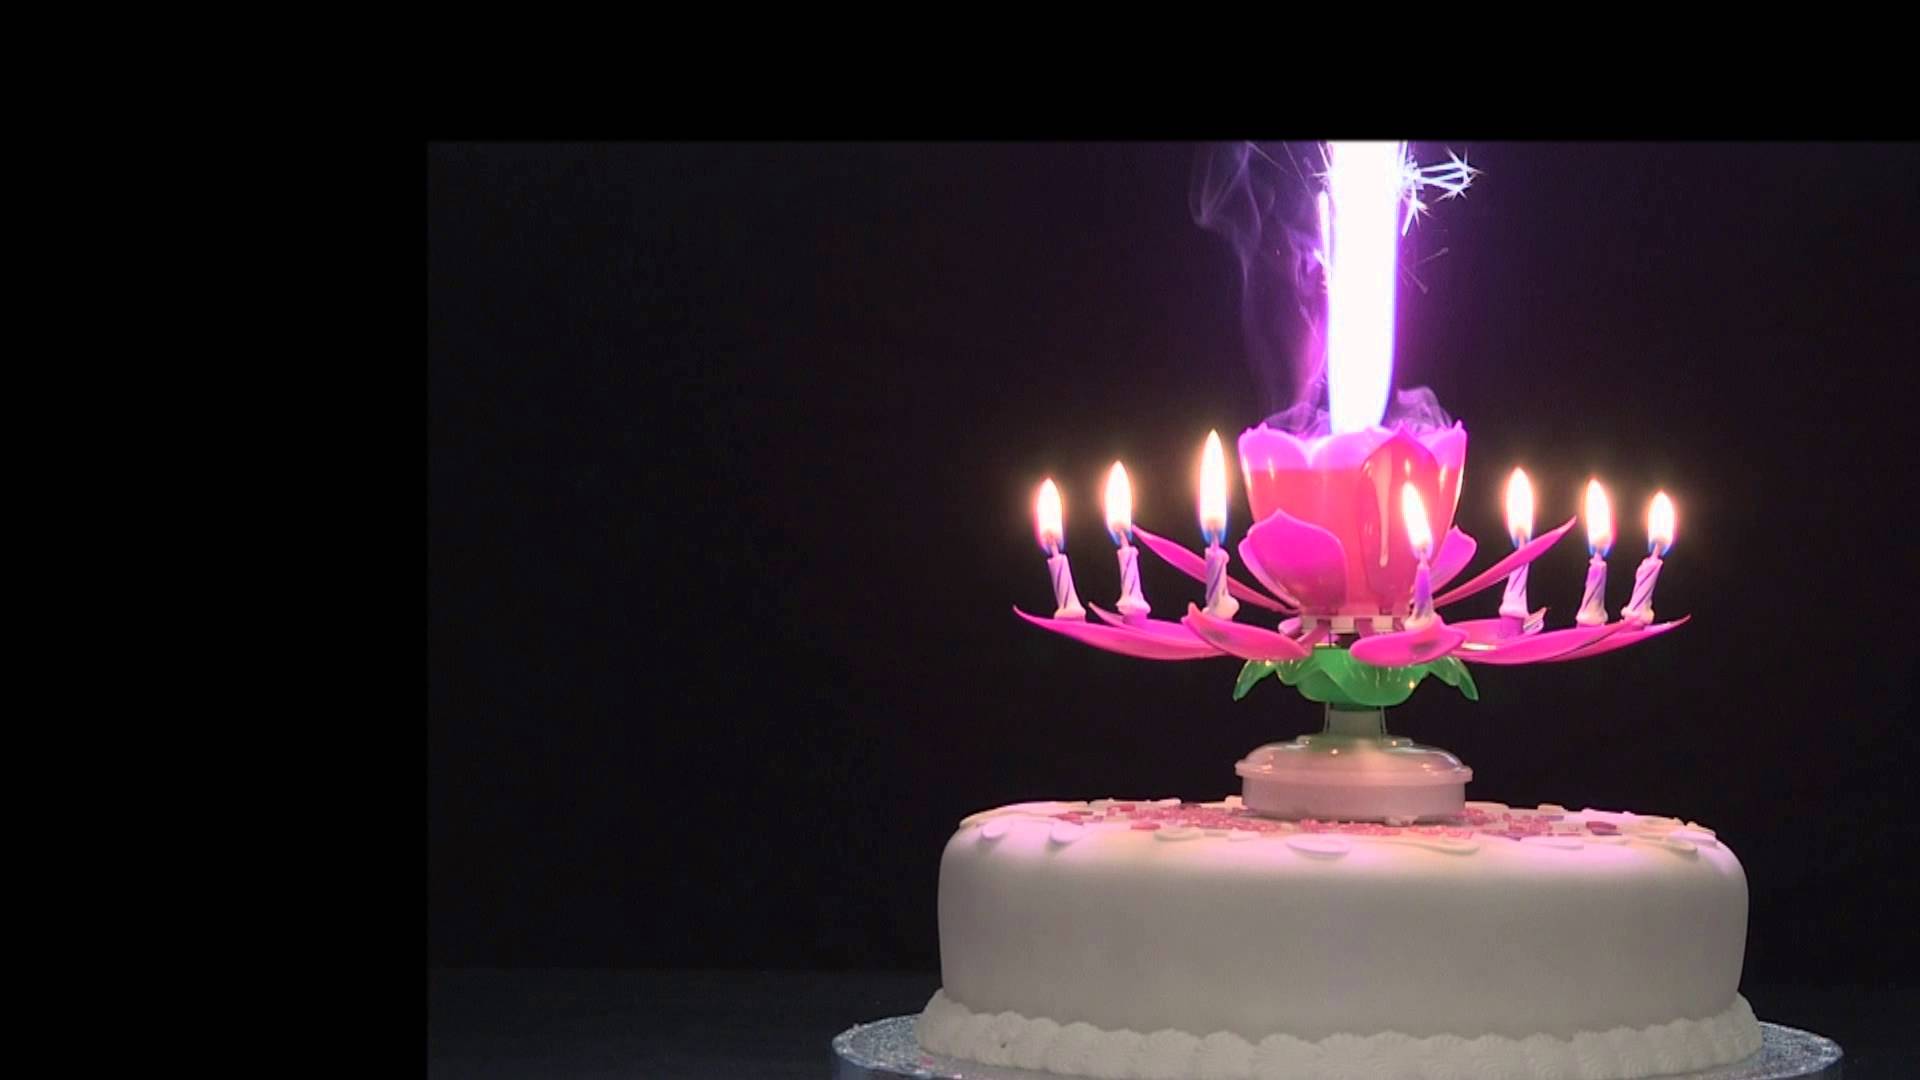 Rotating Musical Flower Candle - YouTube